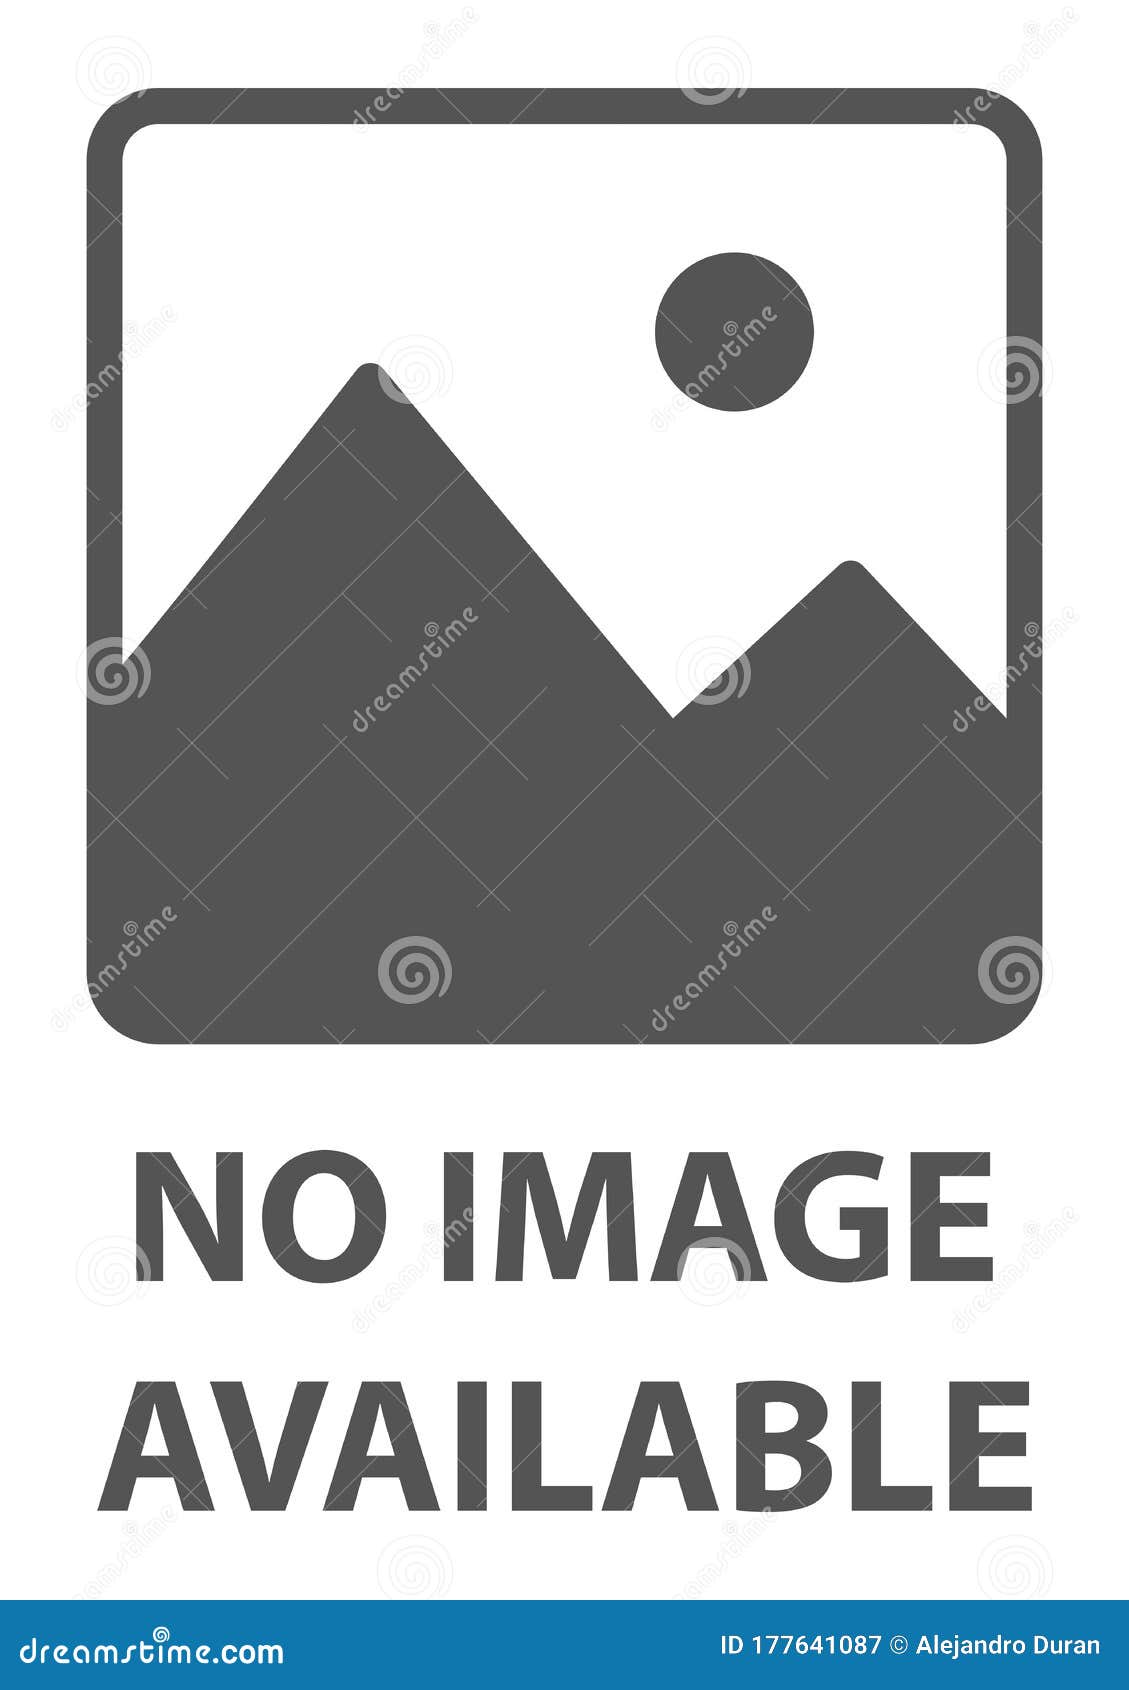 No Image Available Icon Stock Vector Illustration Of Gray 177641087